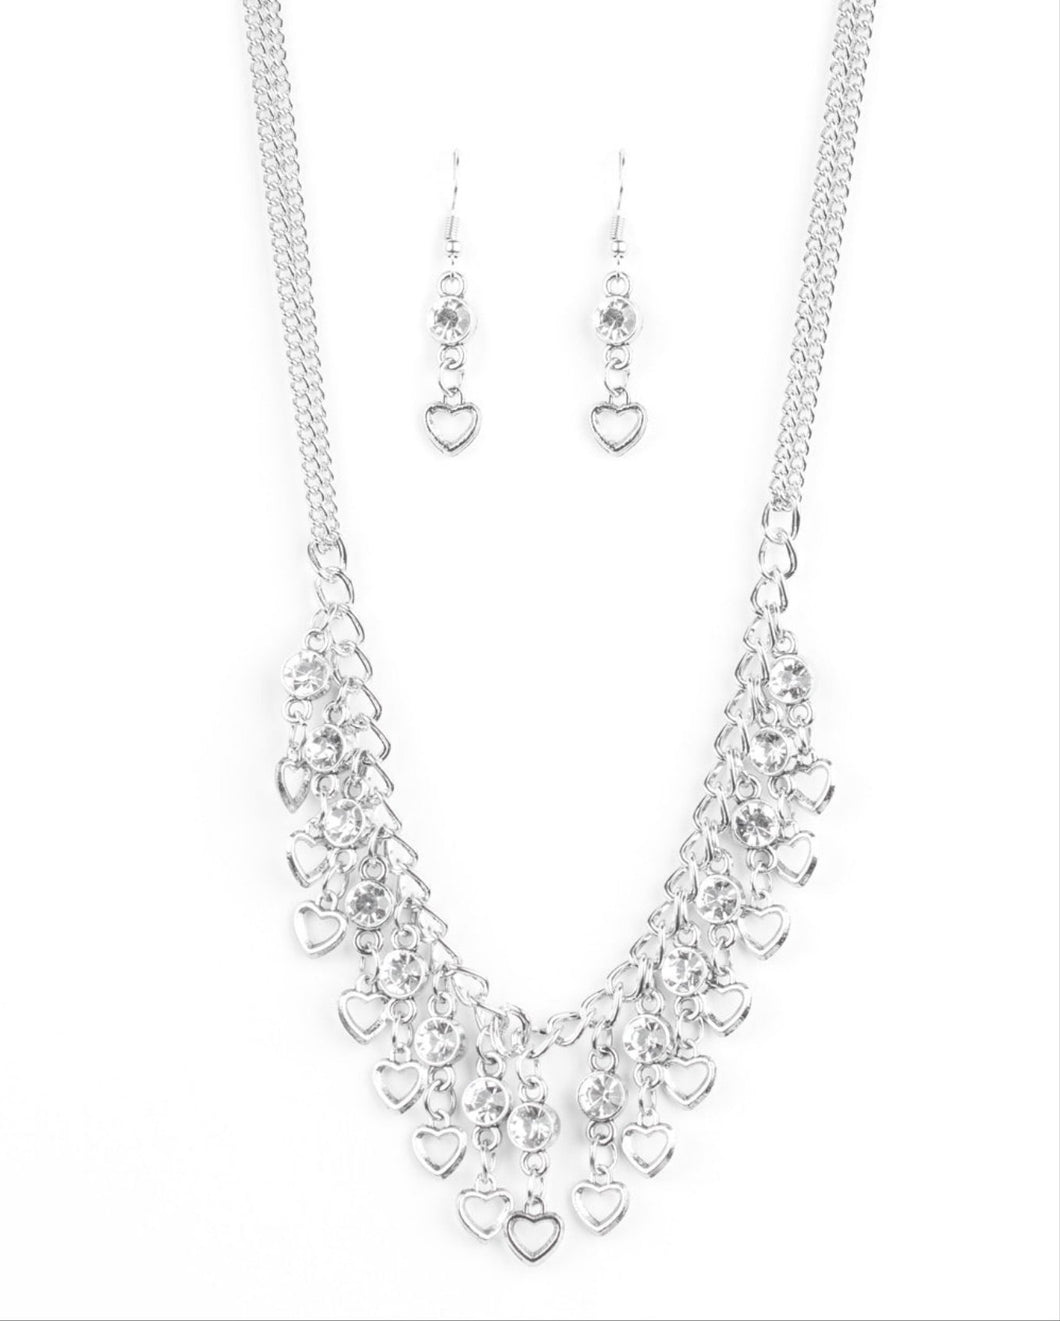 Valentines Day Drama Silver and Bling Necklace and Earrings